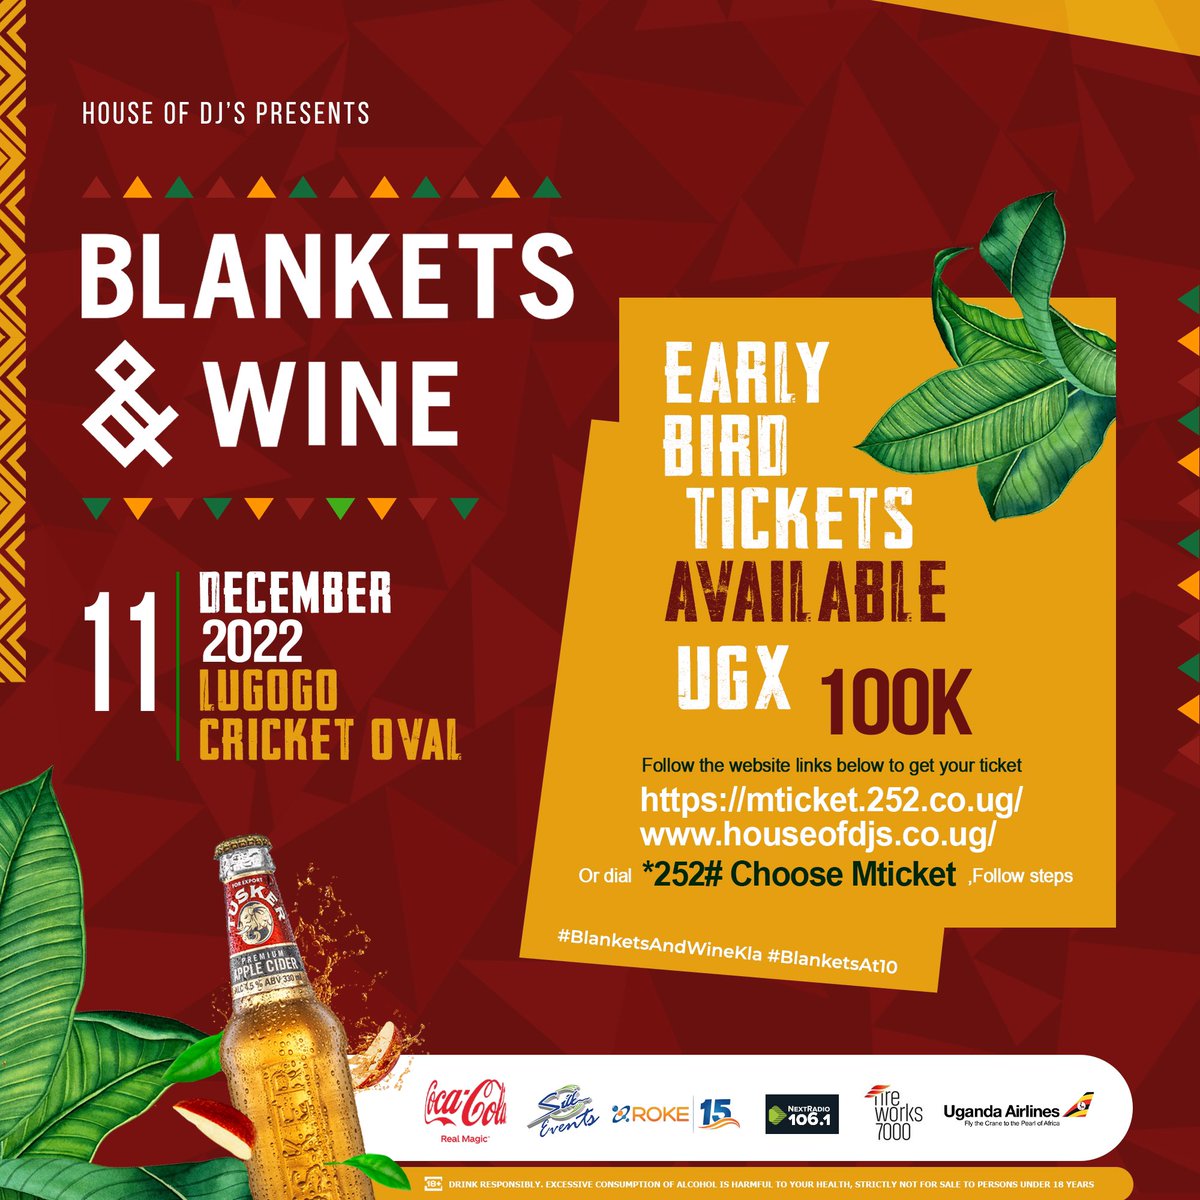 Early Bird tickets are up for grabs at only 100k here: mticket.252.co.ug & here: houseofdjs.co.ug Or dial *252#, choose Mticket and follow the steps. #BlanketsAndWineKla #BlanketsAt10